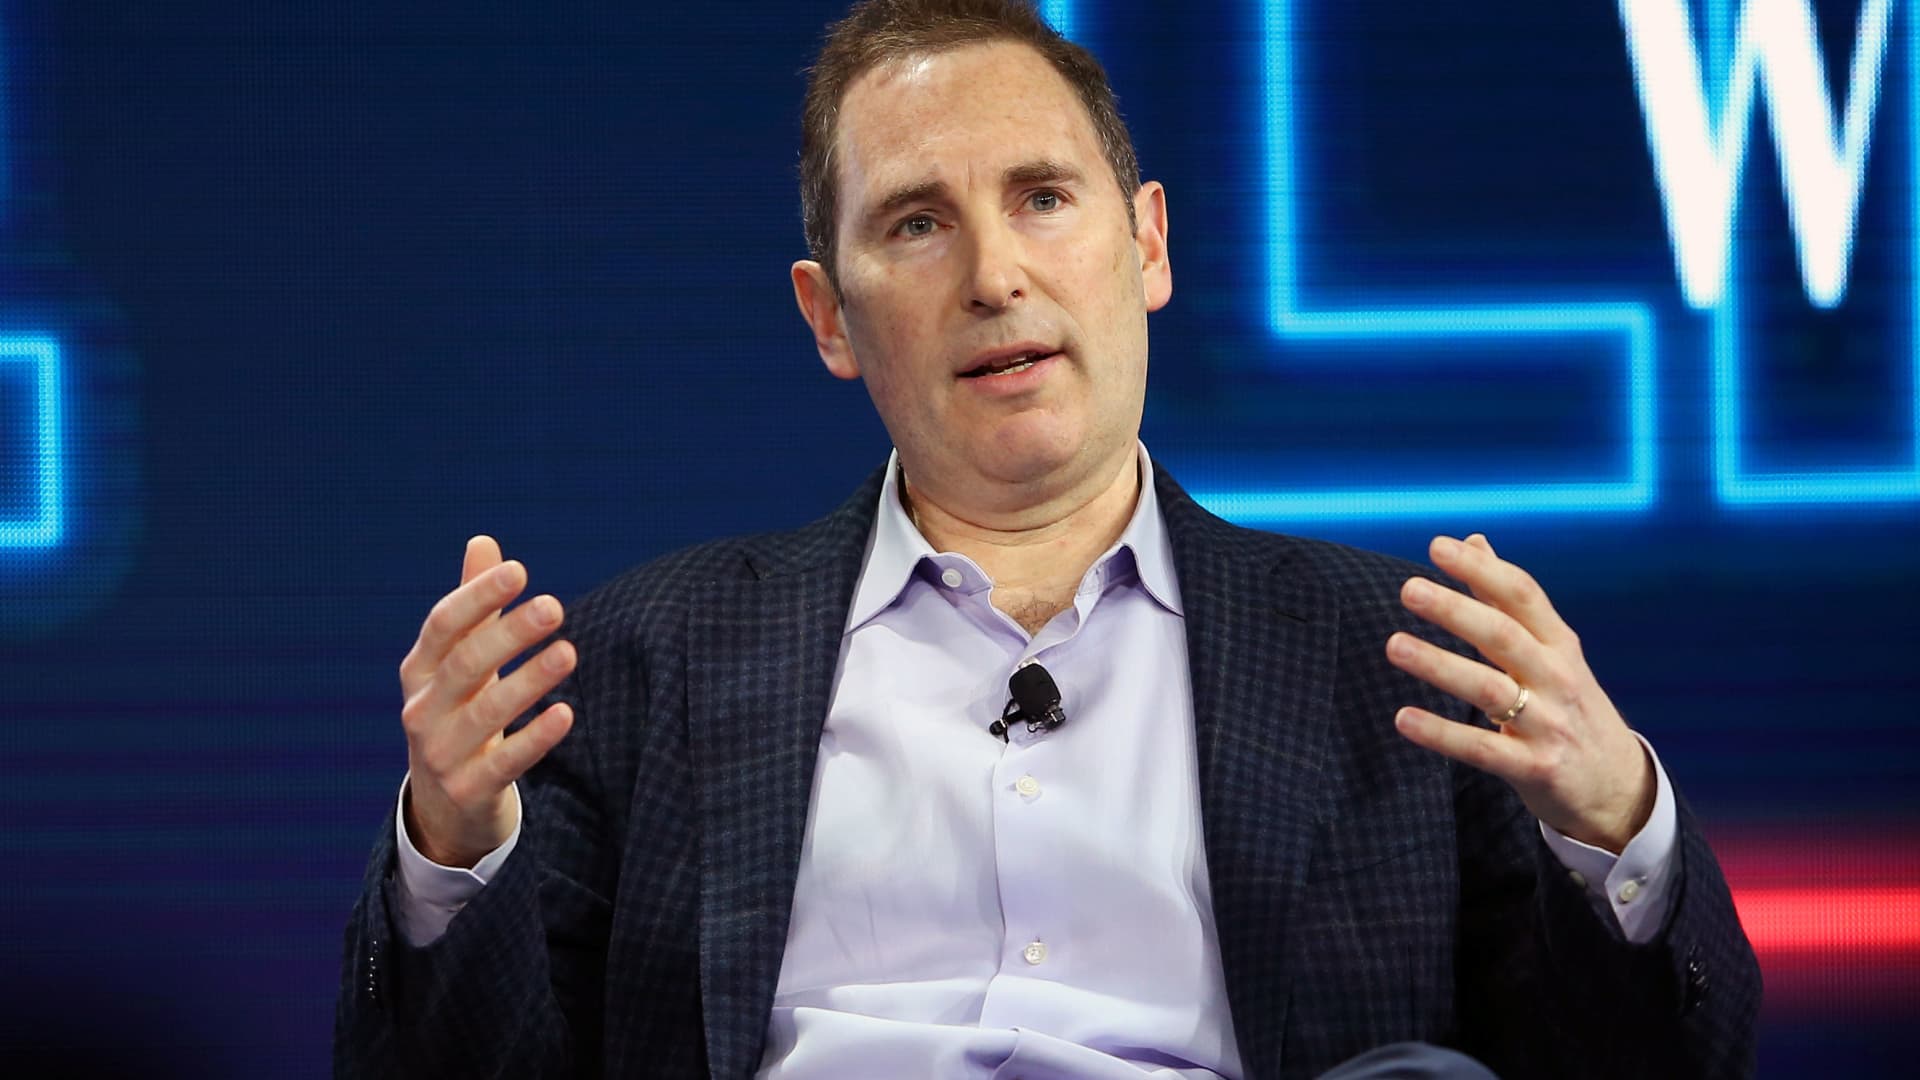 Shuttered businesses, canceled warehouses and hiring freezes: Amazon is having a wave of frugality under CEO Andy Jassy